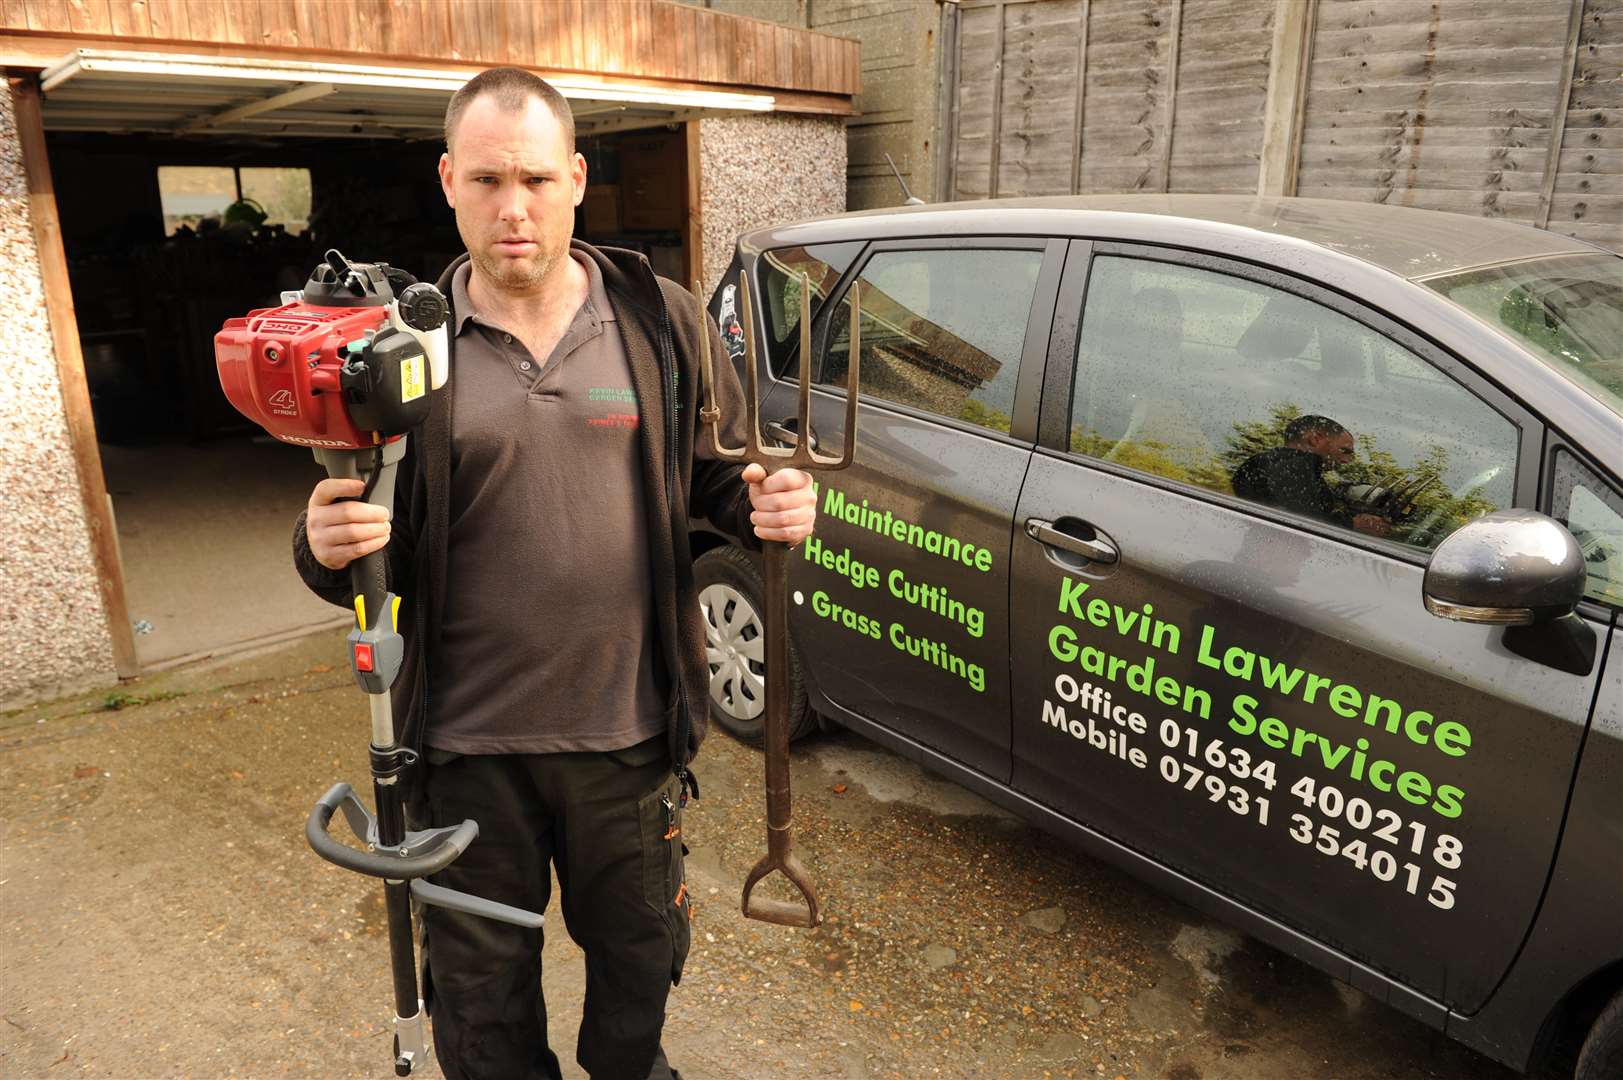 Kevin Lawrence has worked hard to build up his business and is well liked by his customers